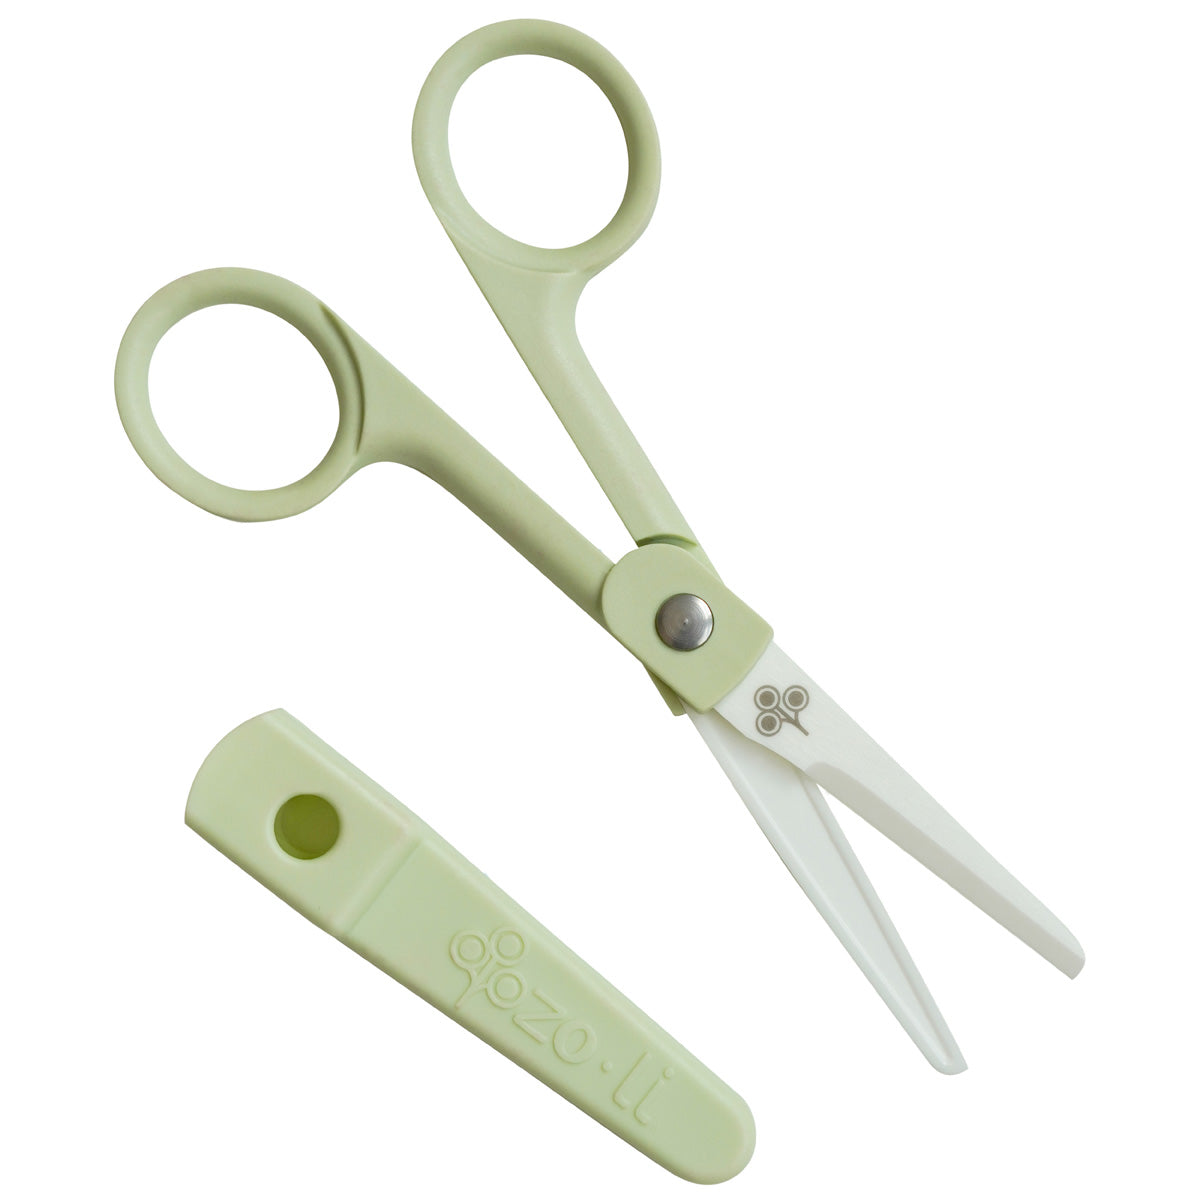 Baby Food Scissors Stainless Steel Toddler Safety Food Vegetables Scissor  Shears